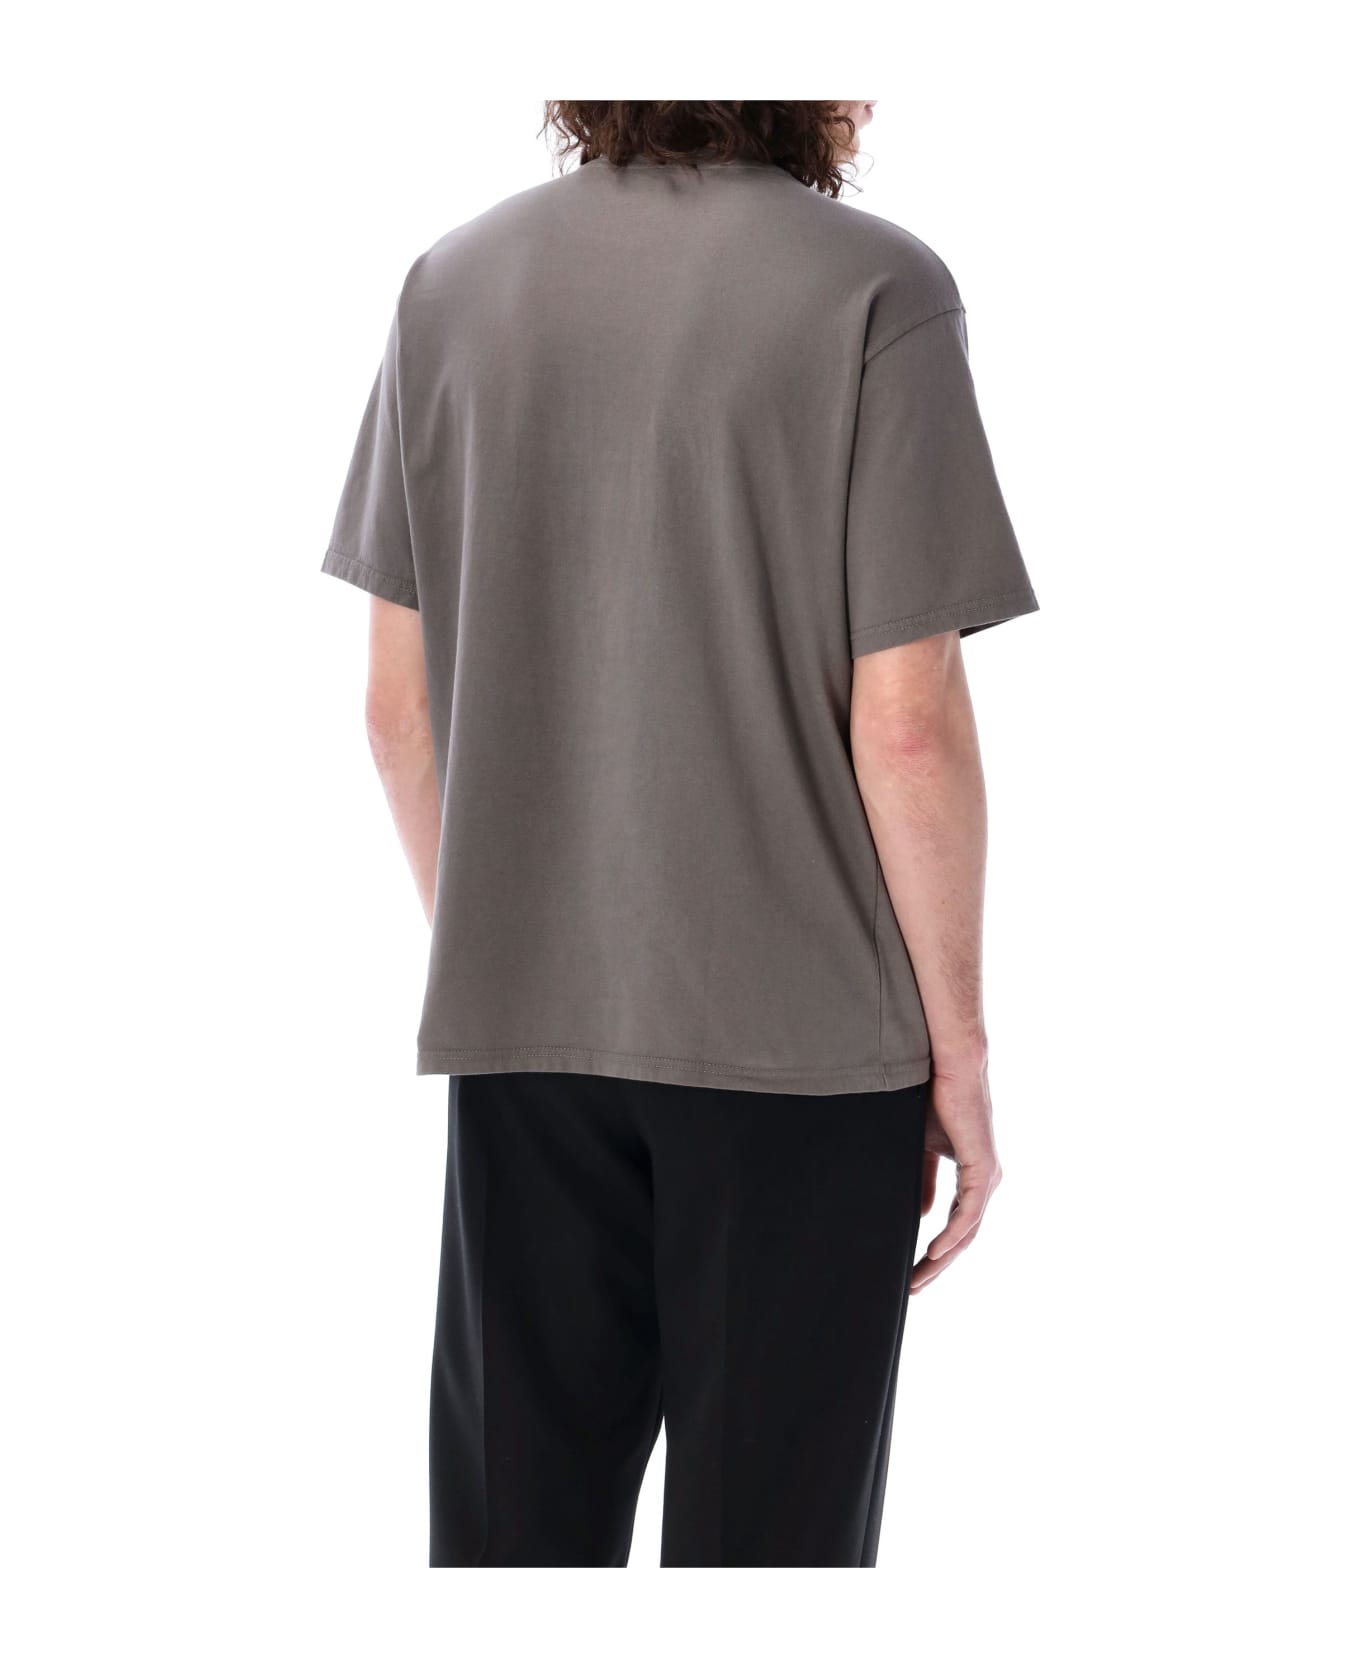 Undercover Jun Takahashi Embroidered T-shirt - GRAY